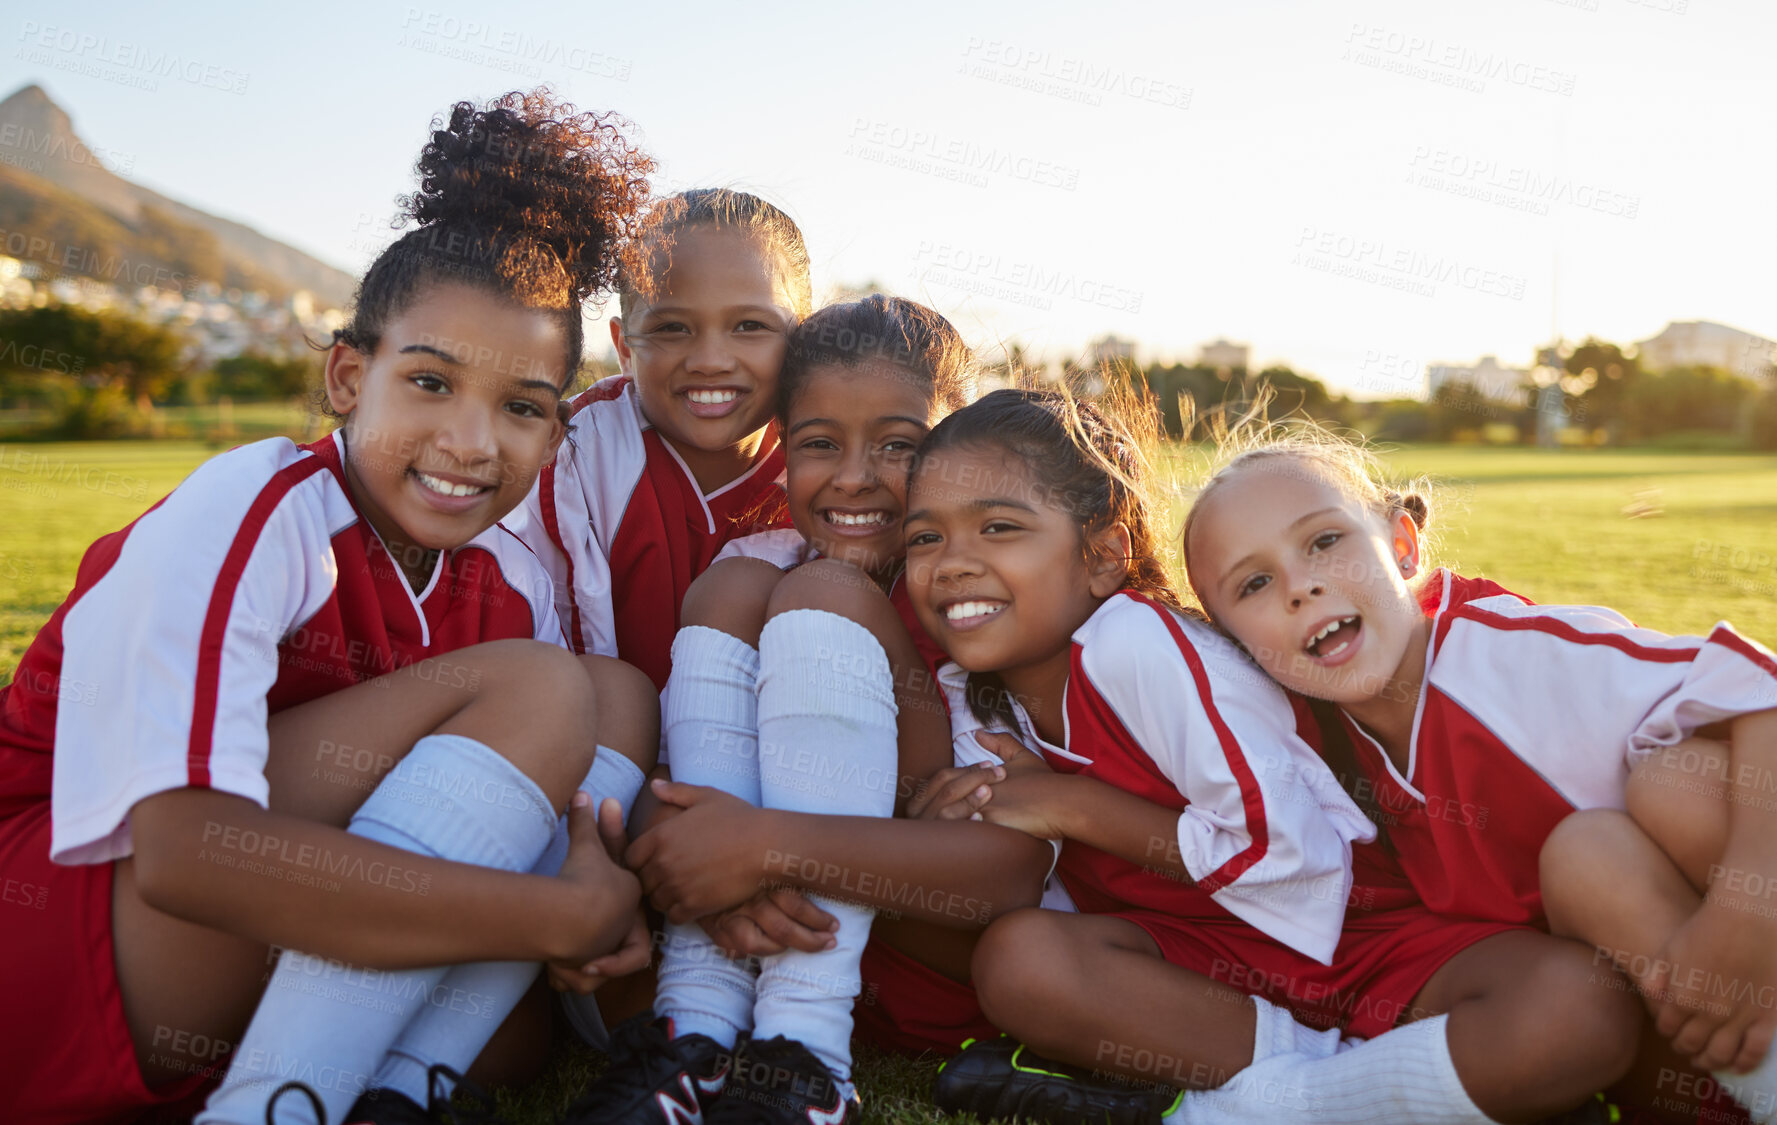 Buy stock photo Team, soccer or happy sports girl with smile on field, grass or stadium for health, teamwork or wellness portrait. Children, football or exercise with support, diversity or motivation for sports game